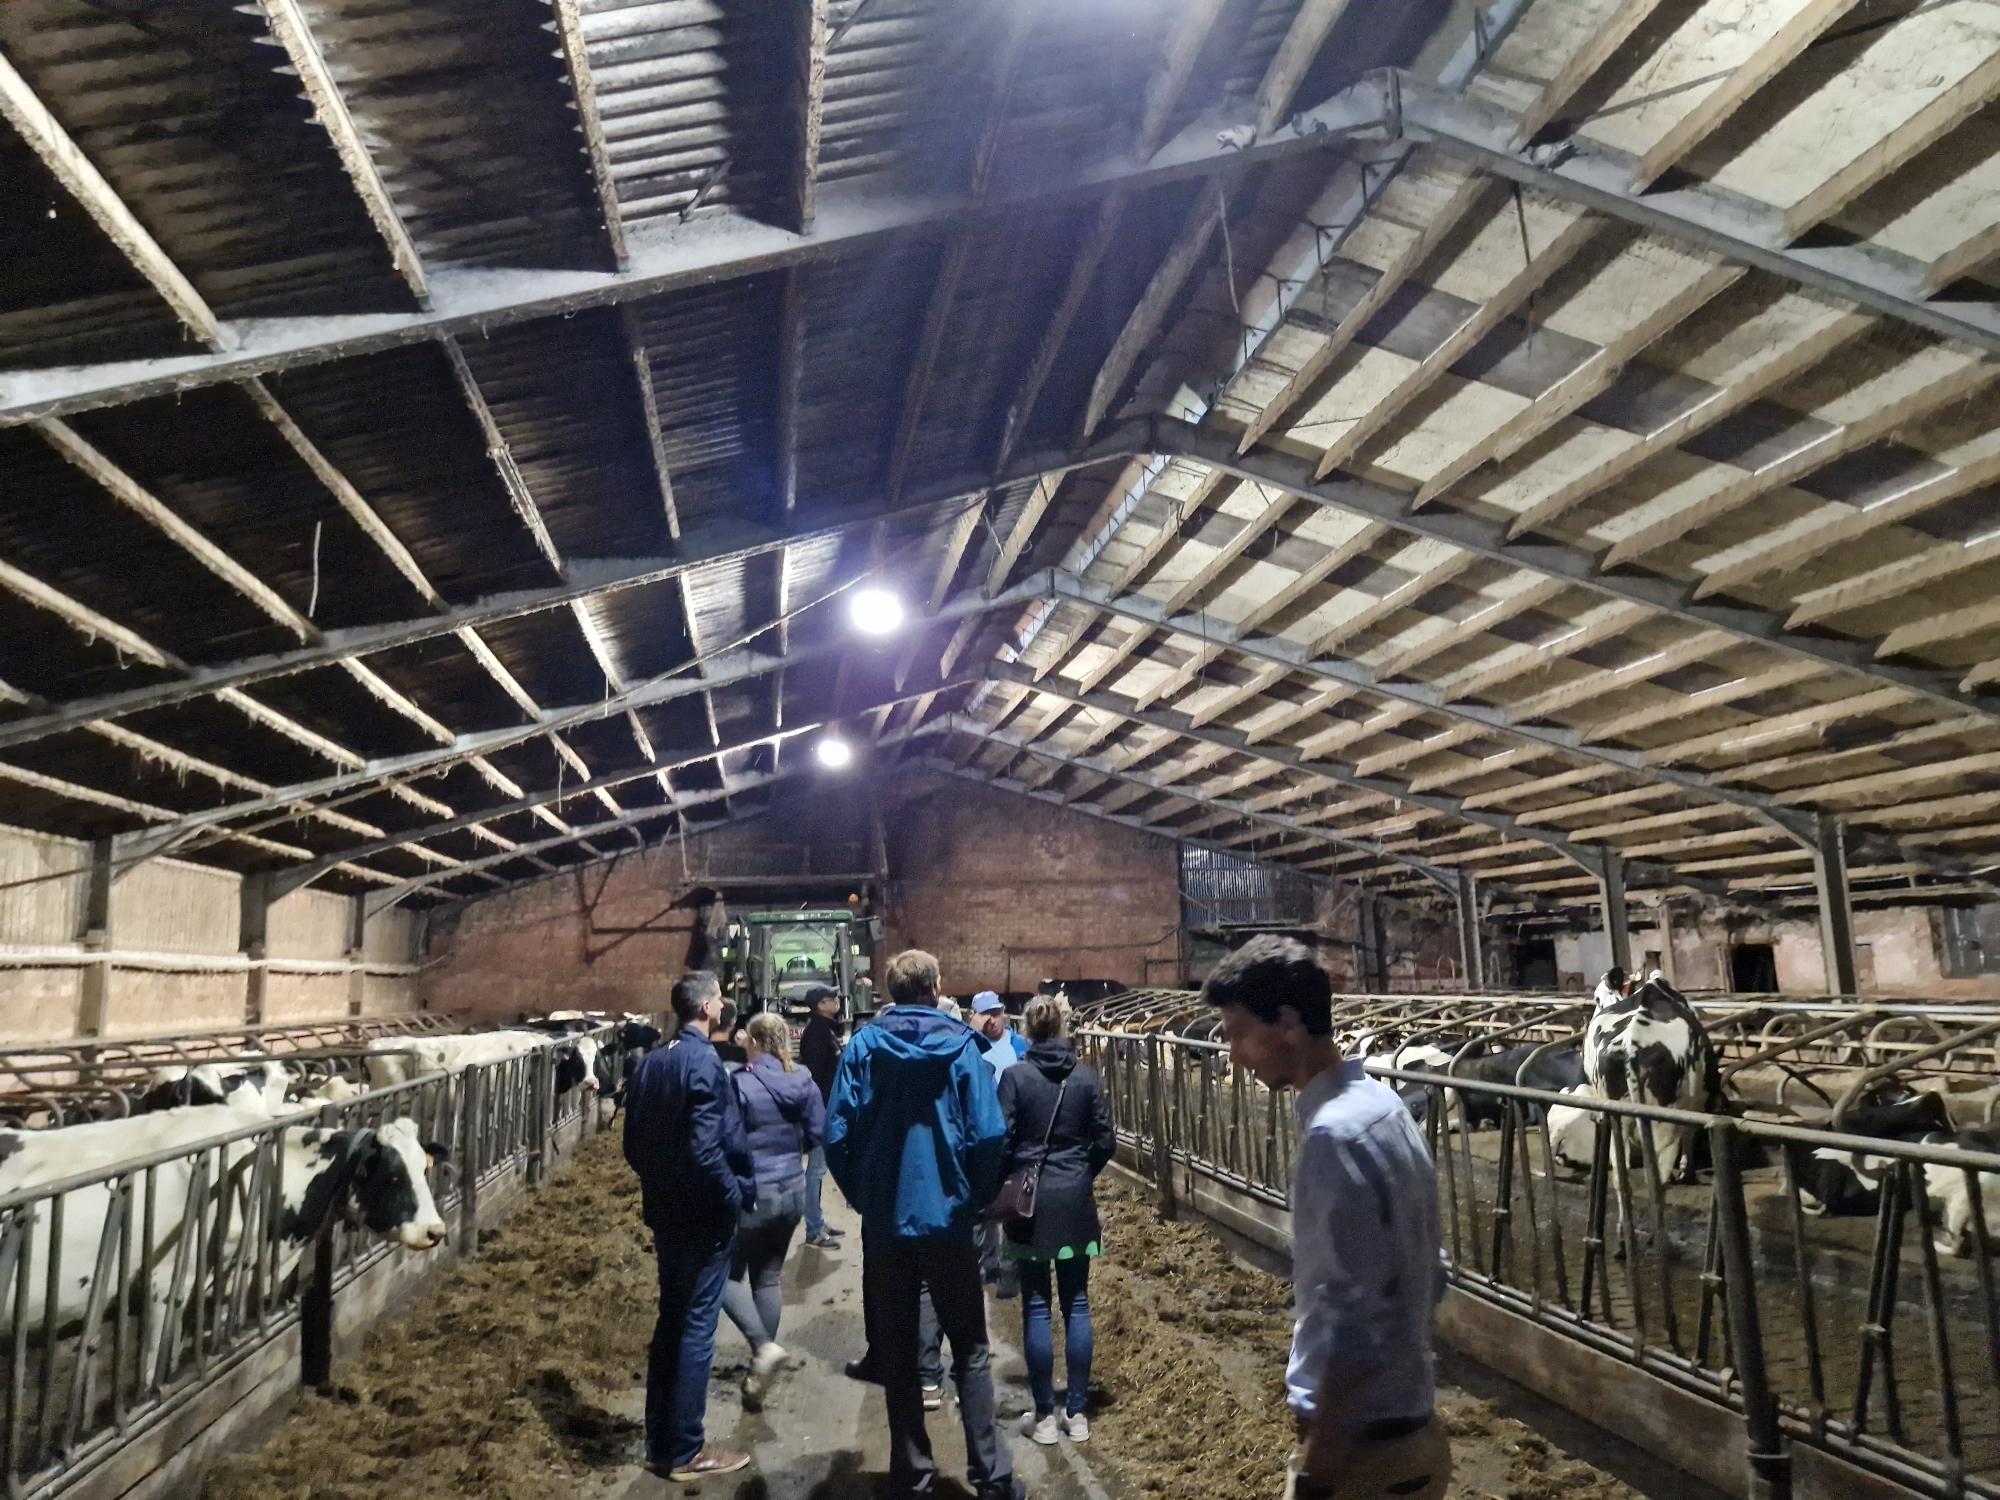 Workshop and site-visit to Heirbaut aLgriculture